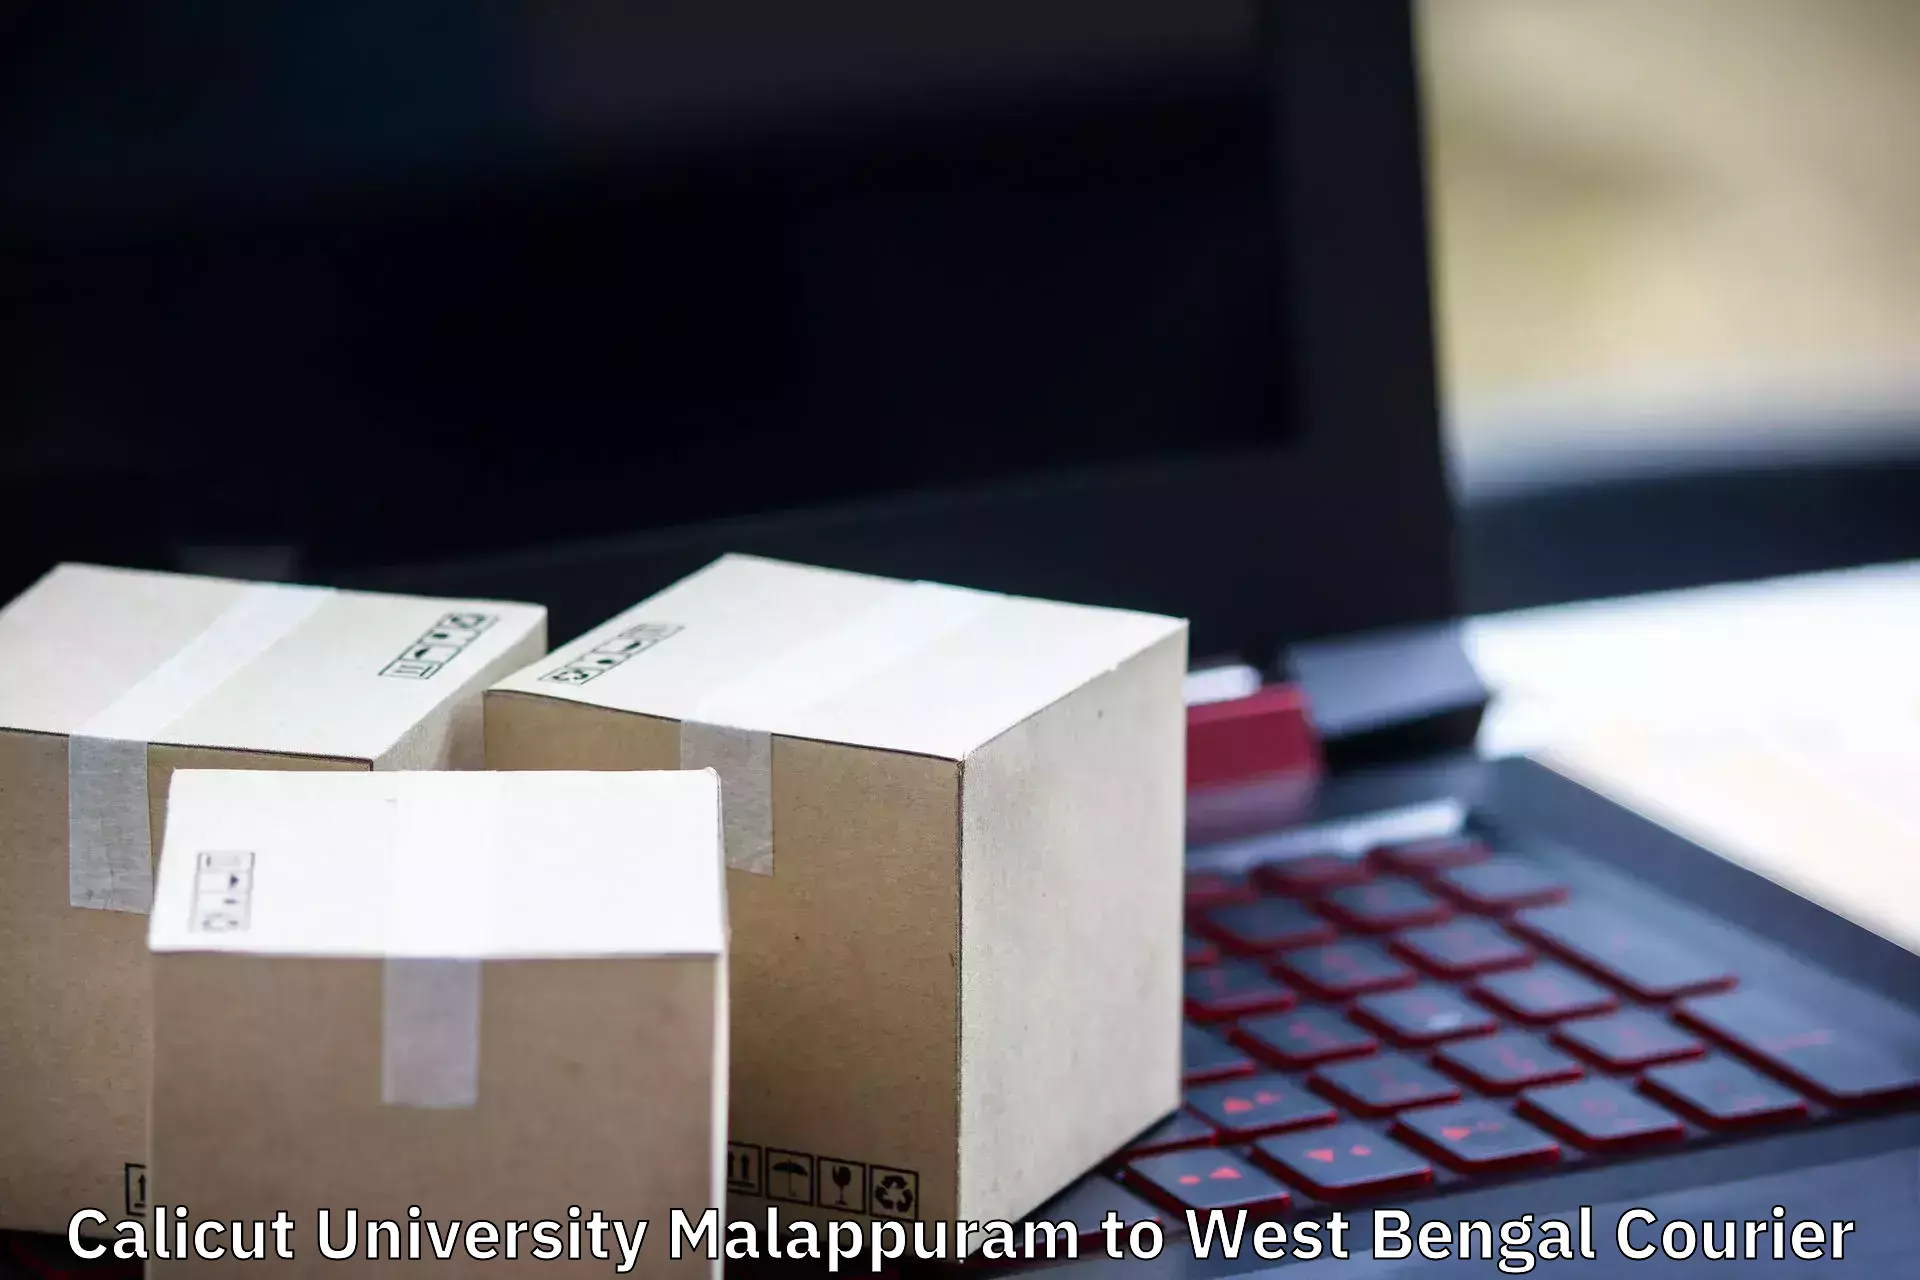 Furniture transport services in Calicut University Malappuram to West Bengal